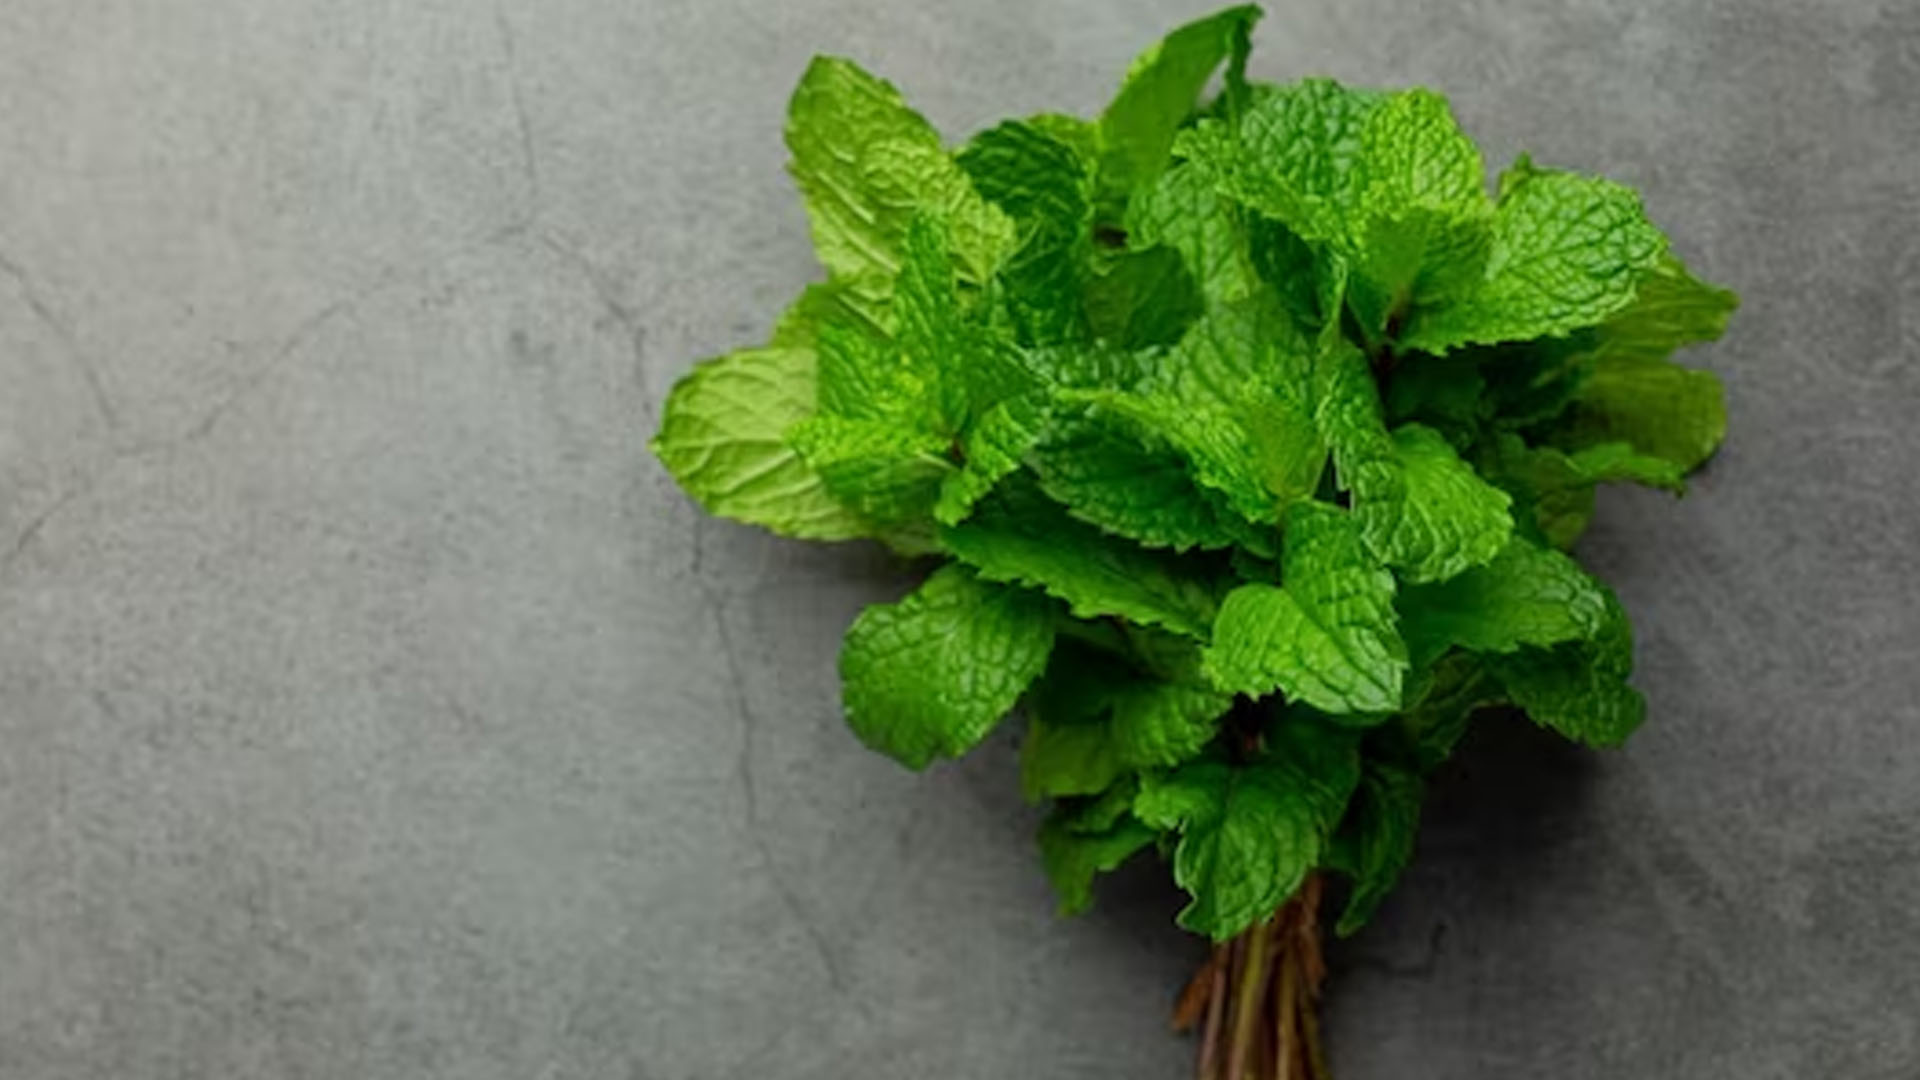 What Are The Health Benefits of Mint Leaf?